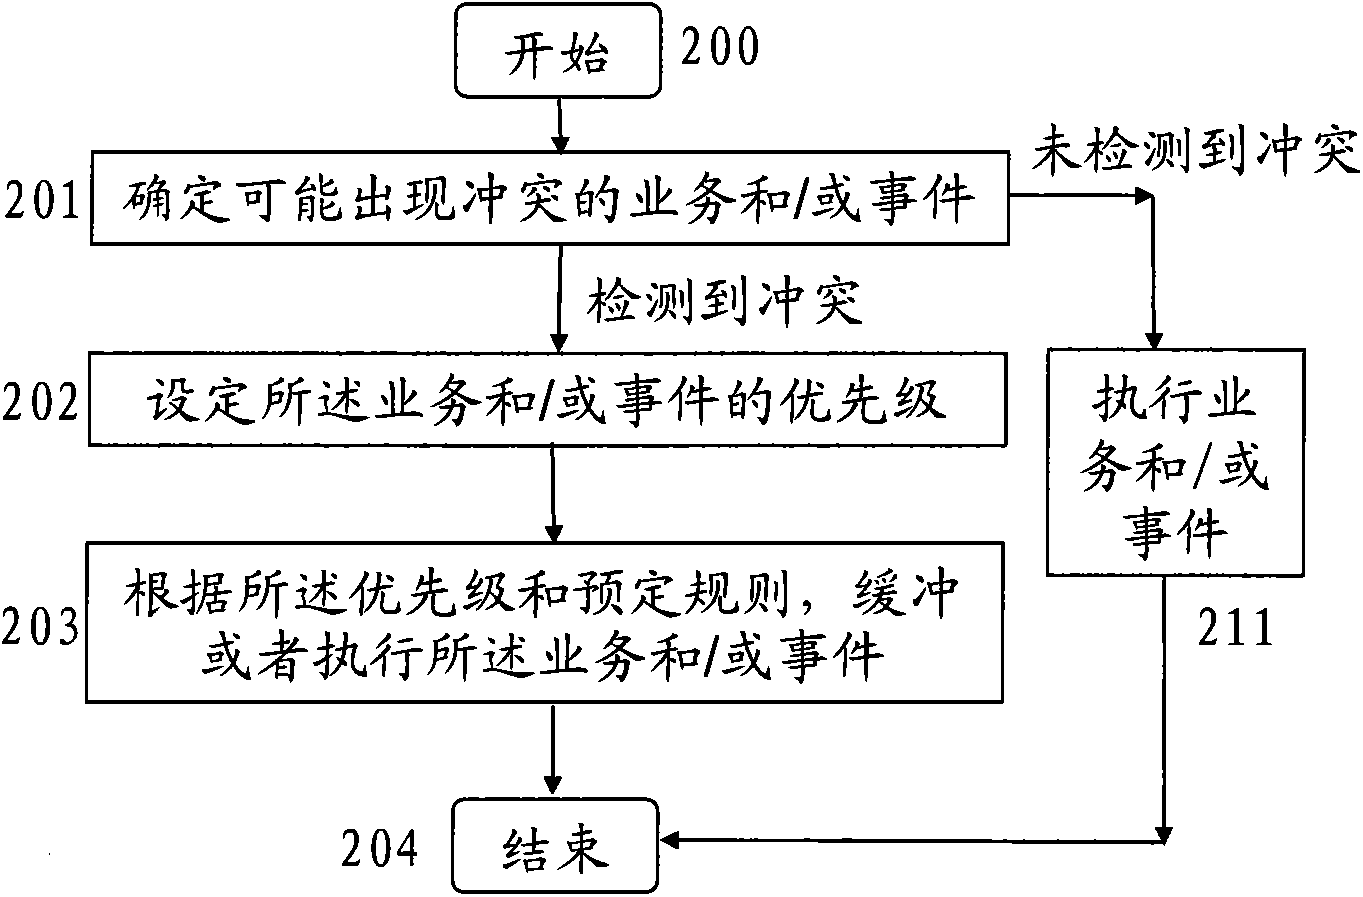 Multi-mode multi-card mobile terminal and business conflict solution method and apparatus thereof